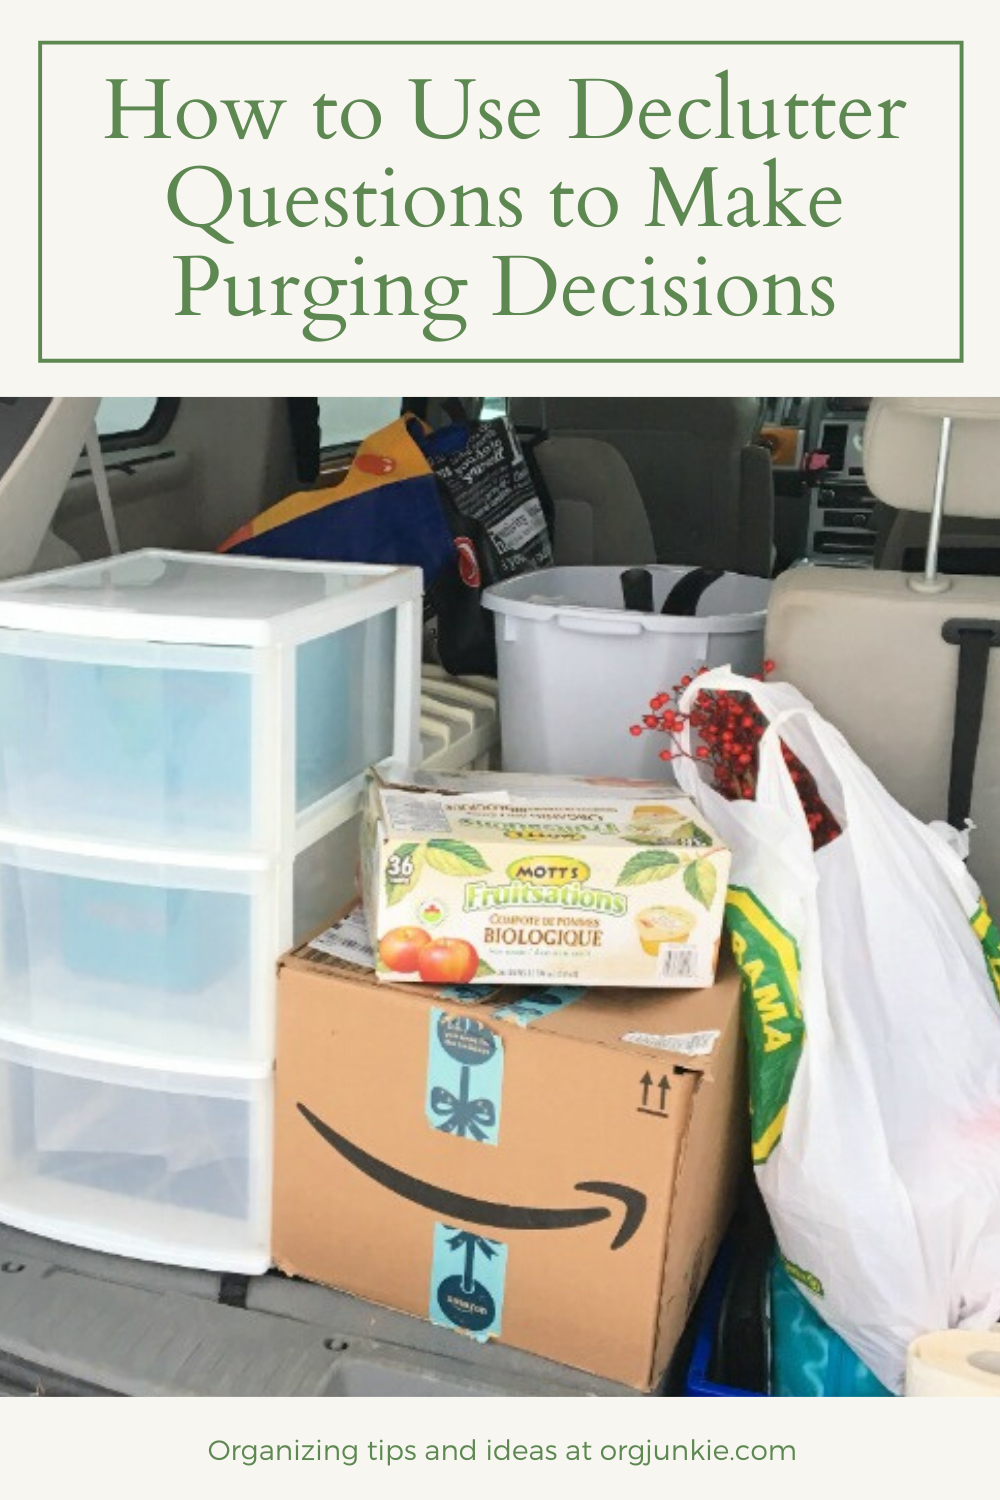 How to Use Declutter Questions to Make Purging Decisions